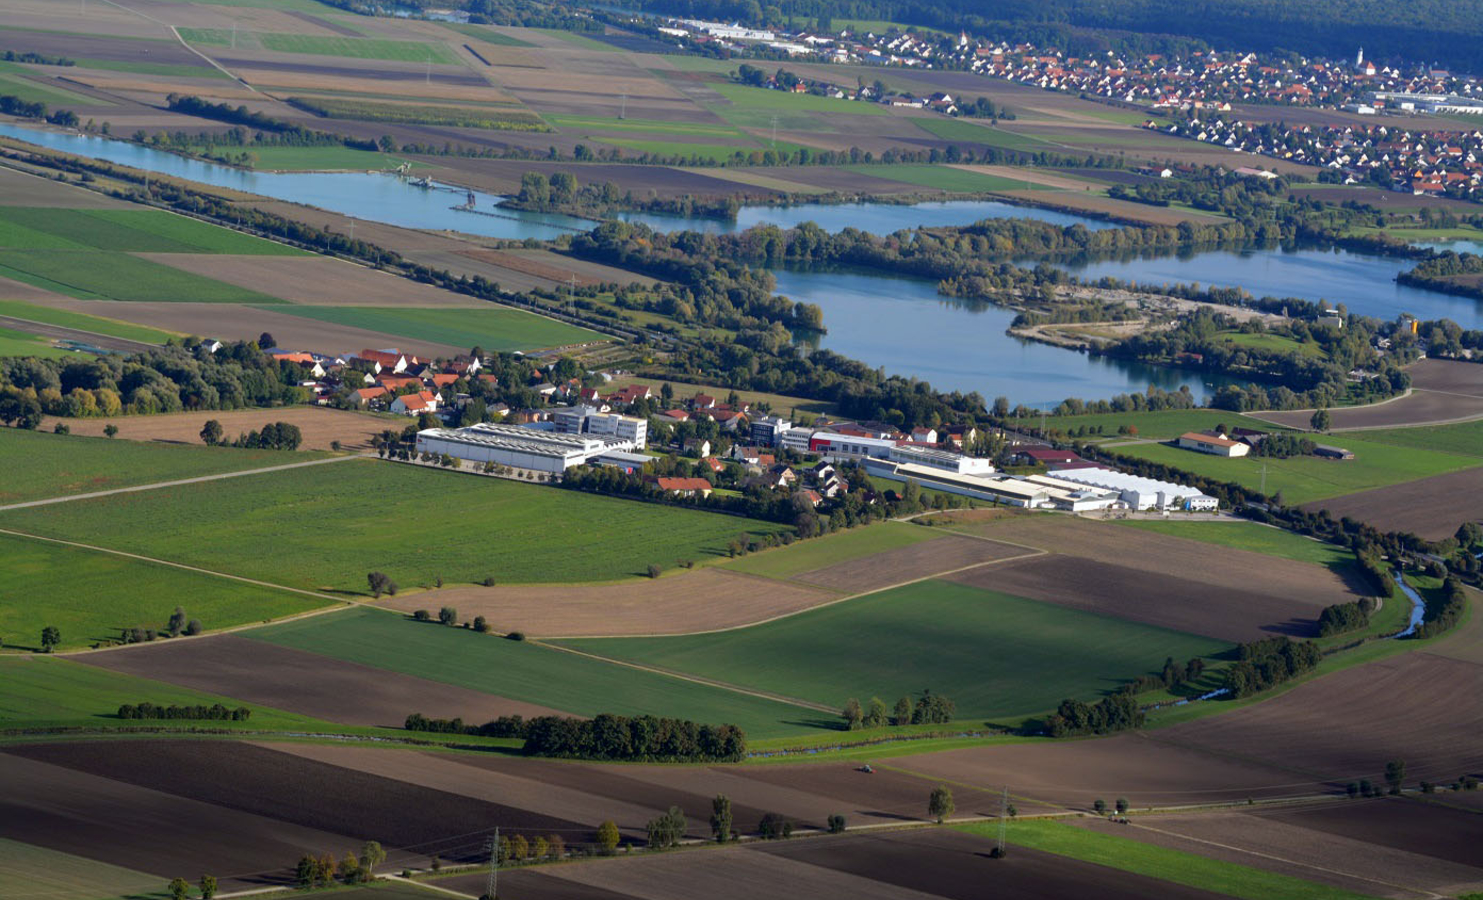 Our Hamlar site is located in the Swabian part of Bavaria in the Danube valley.